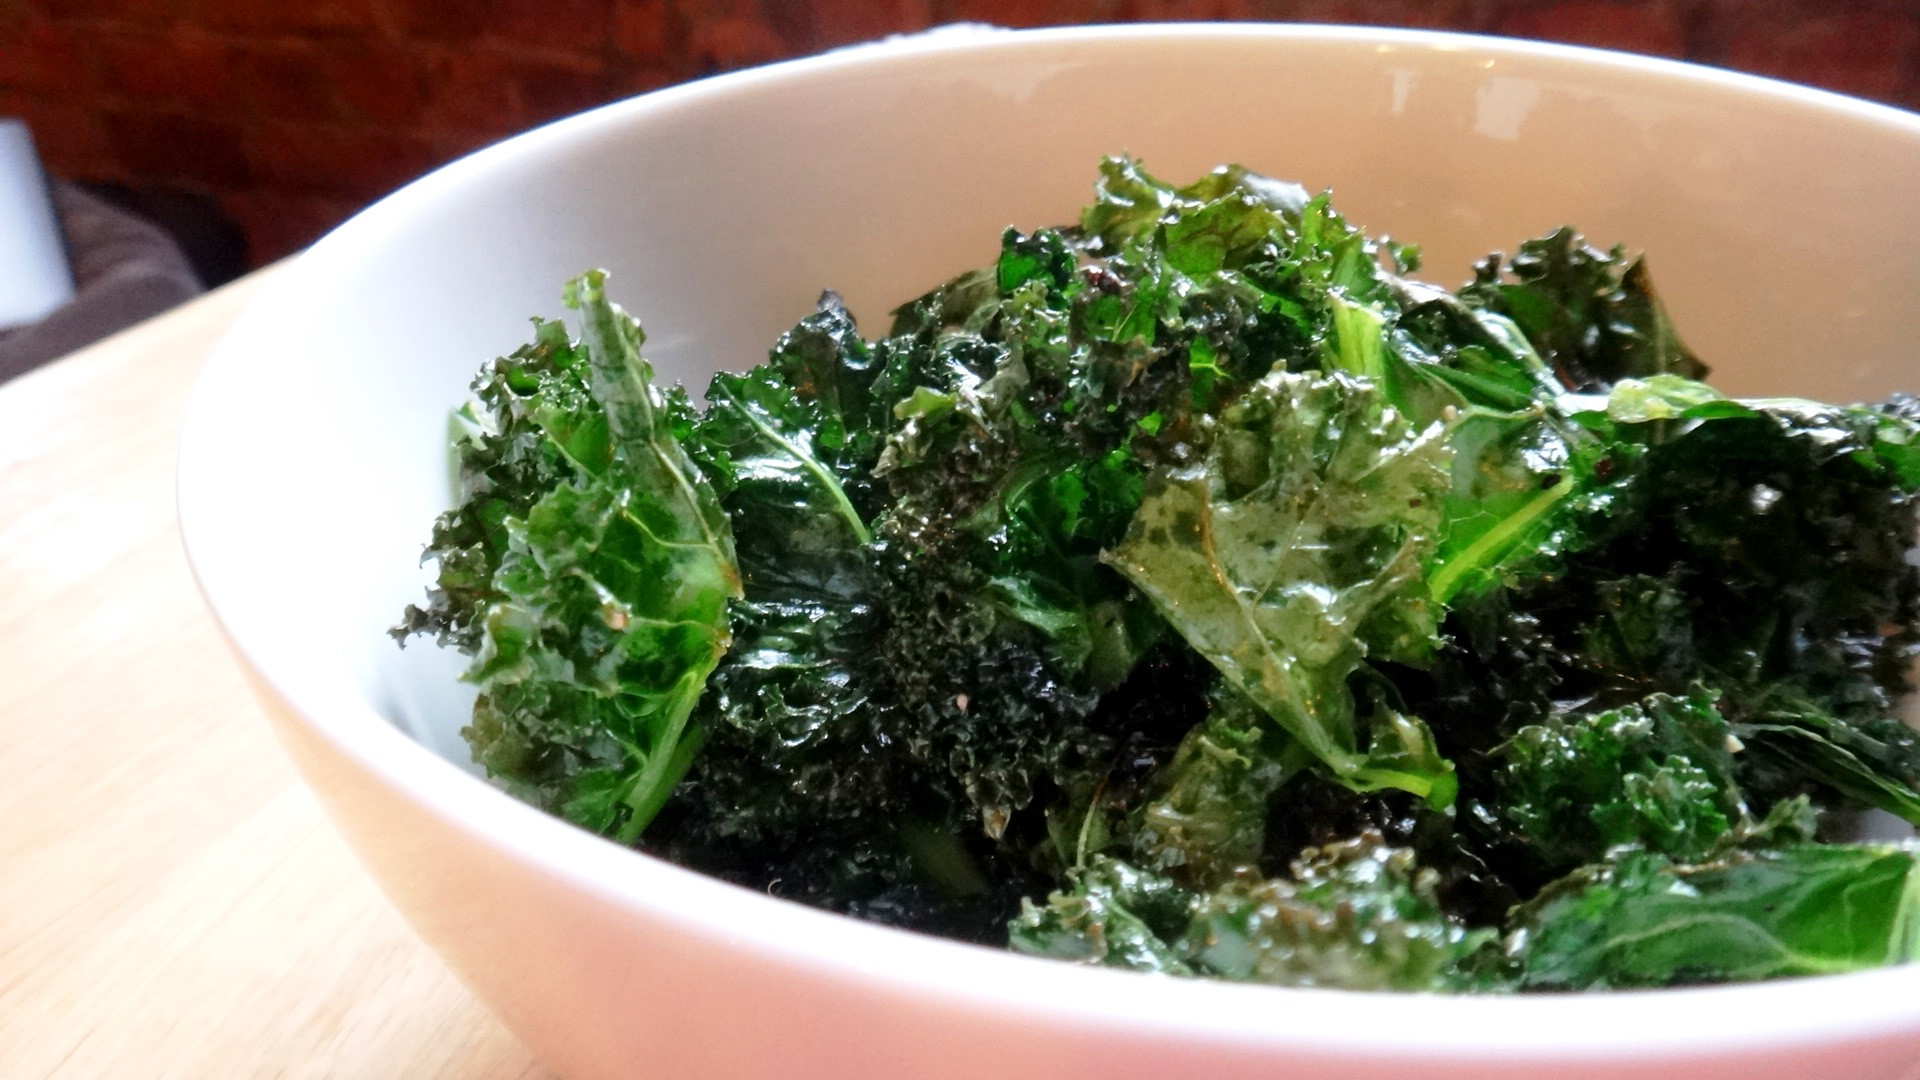 Healthy Snacks To Make At Home
 How To Make Kale Chips at Home The Healthiest Snack